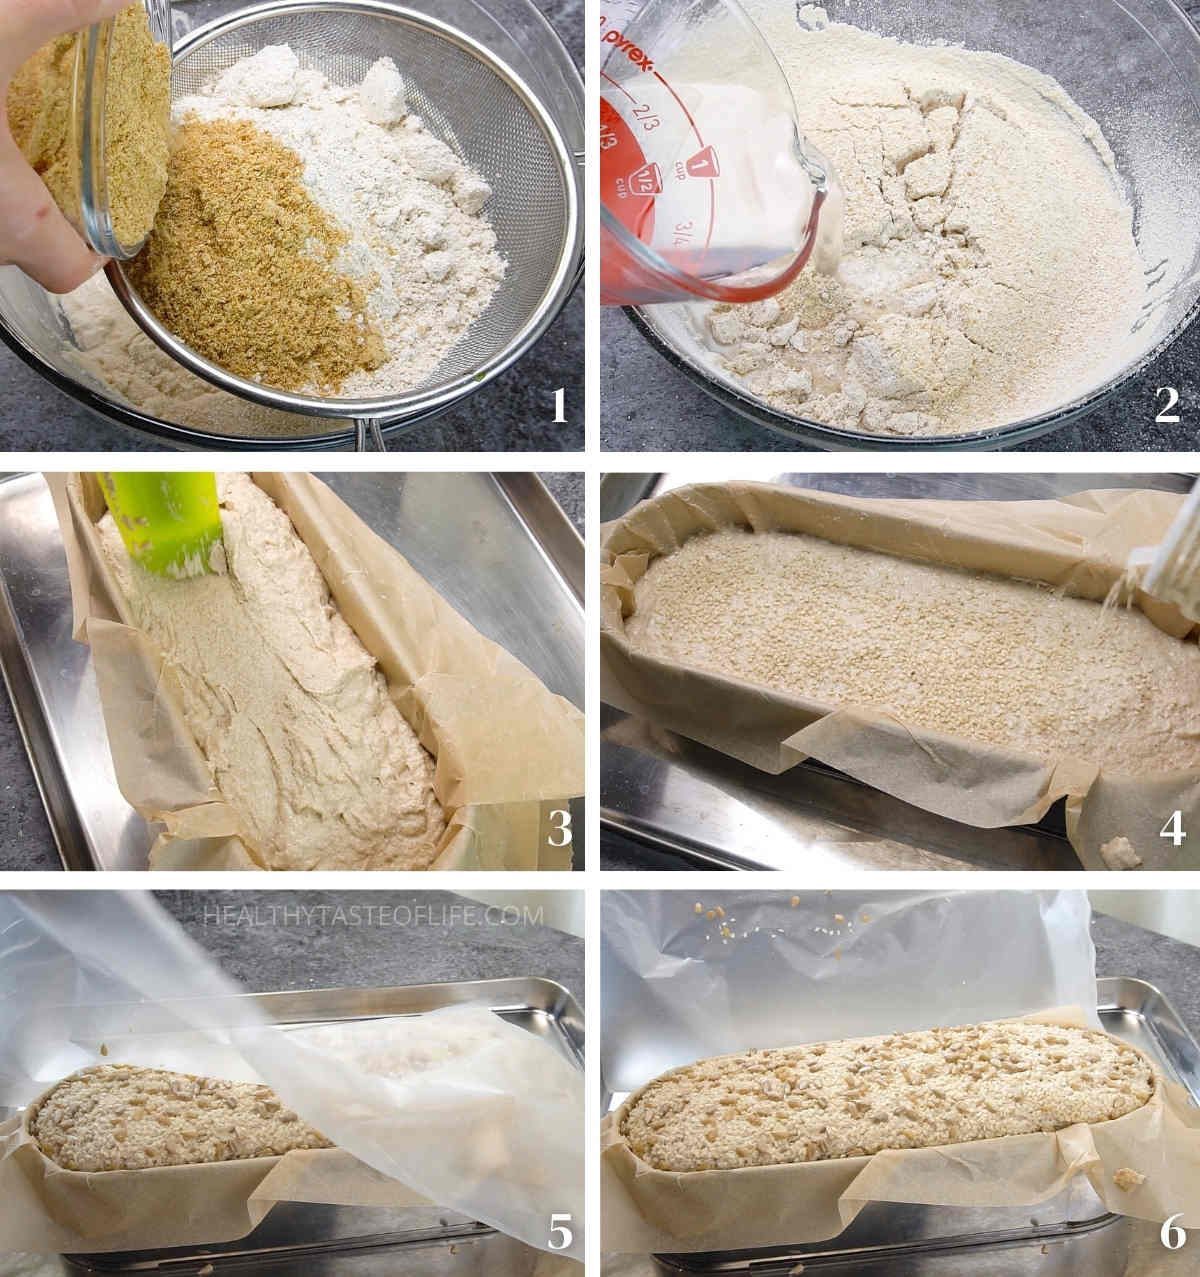 Process shots showing how to make gluten free sourdough batter, how to proof the formed loaf.